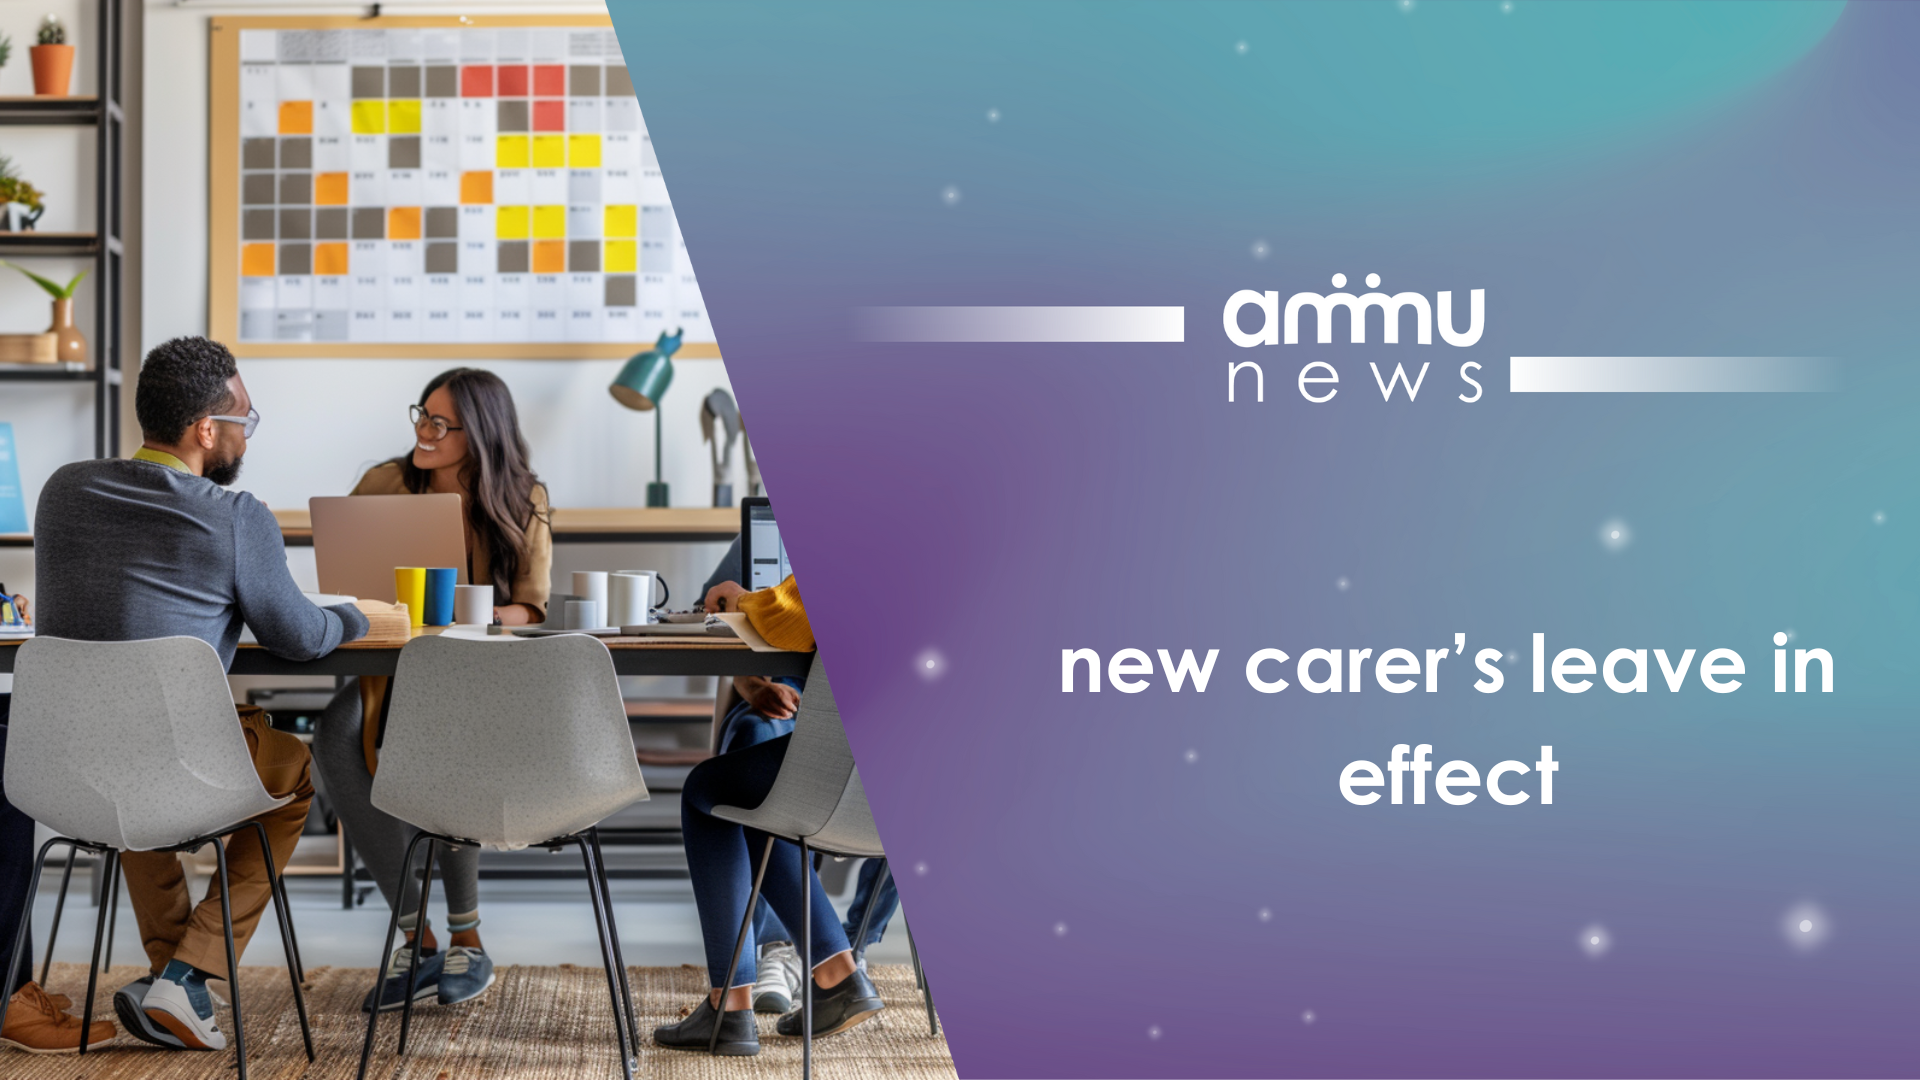 New carer’s leave in effect